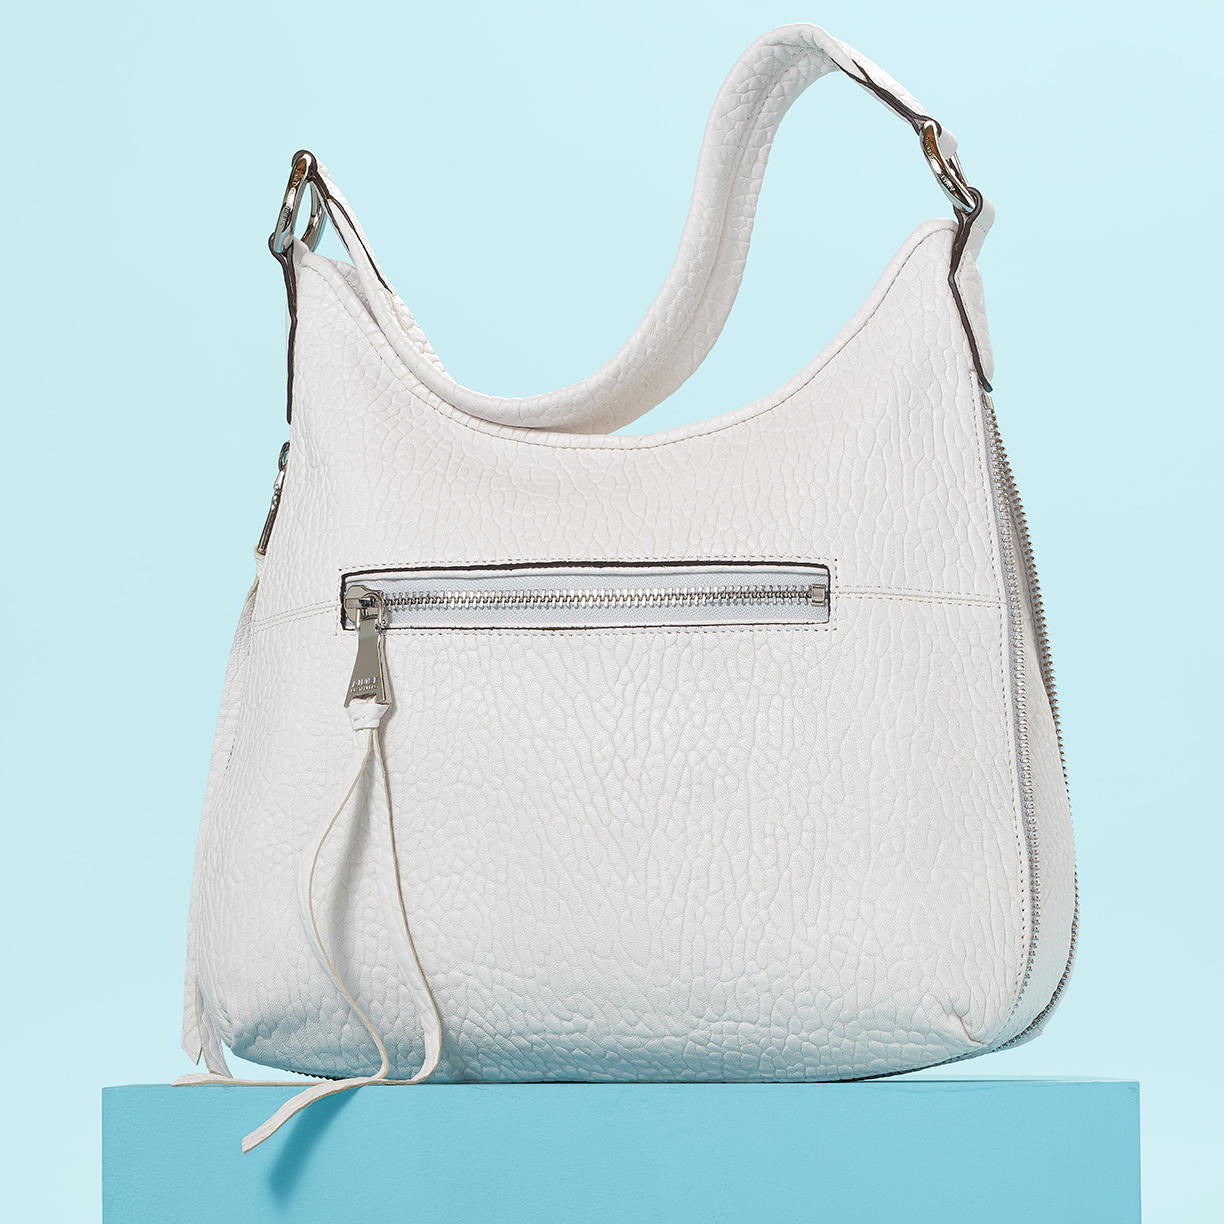 Shoulder Bags Up to 50% Off